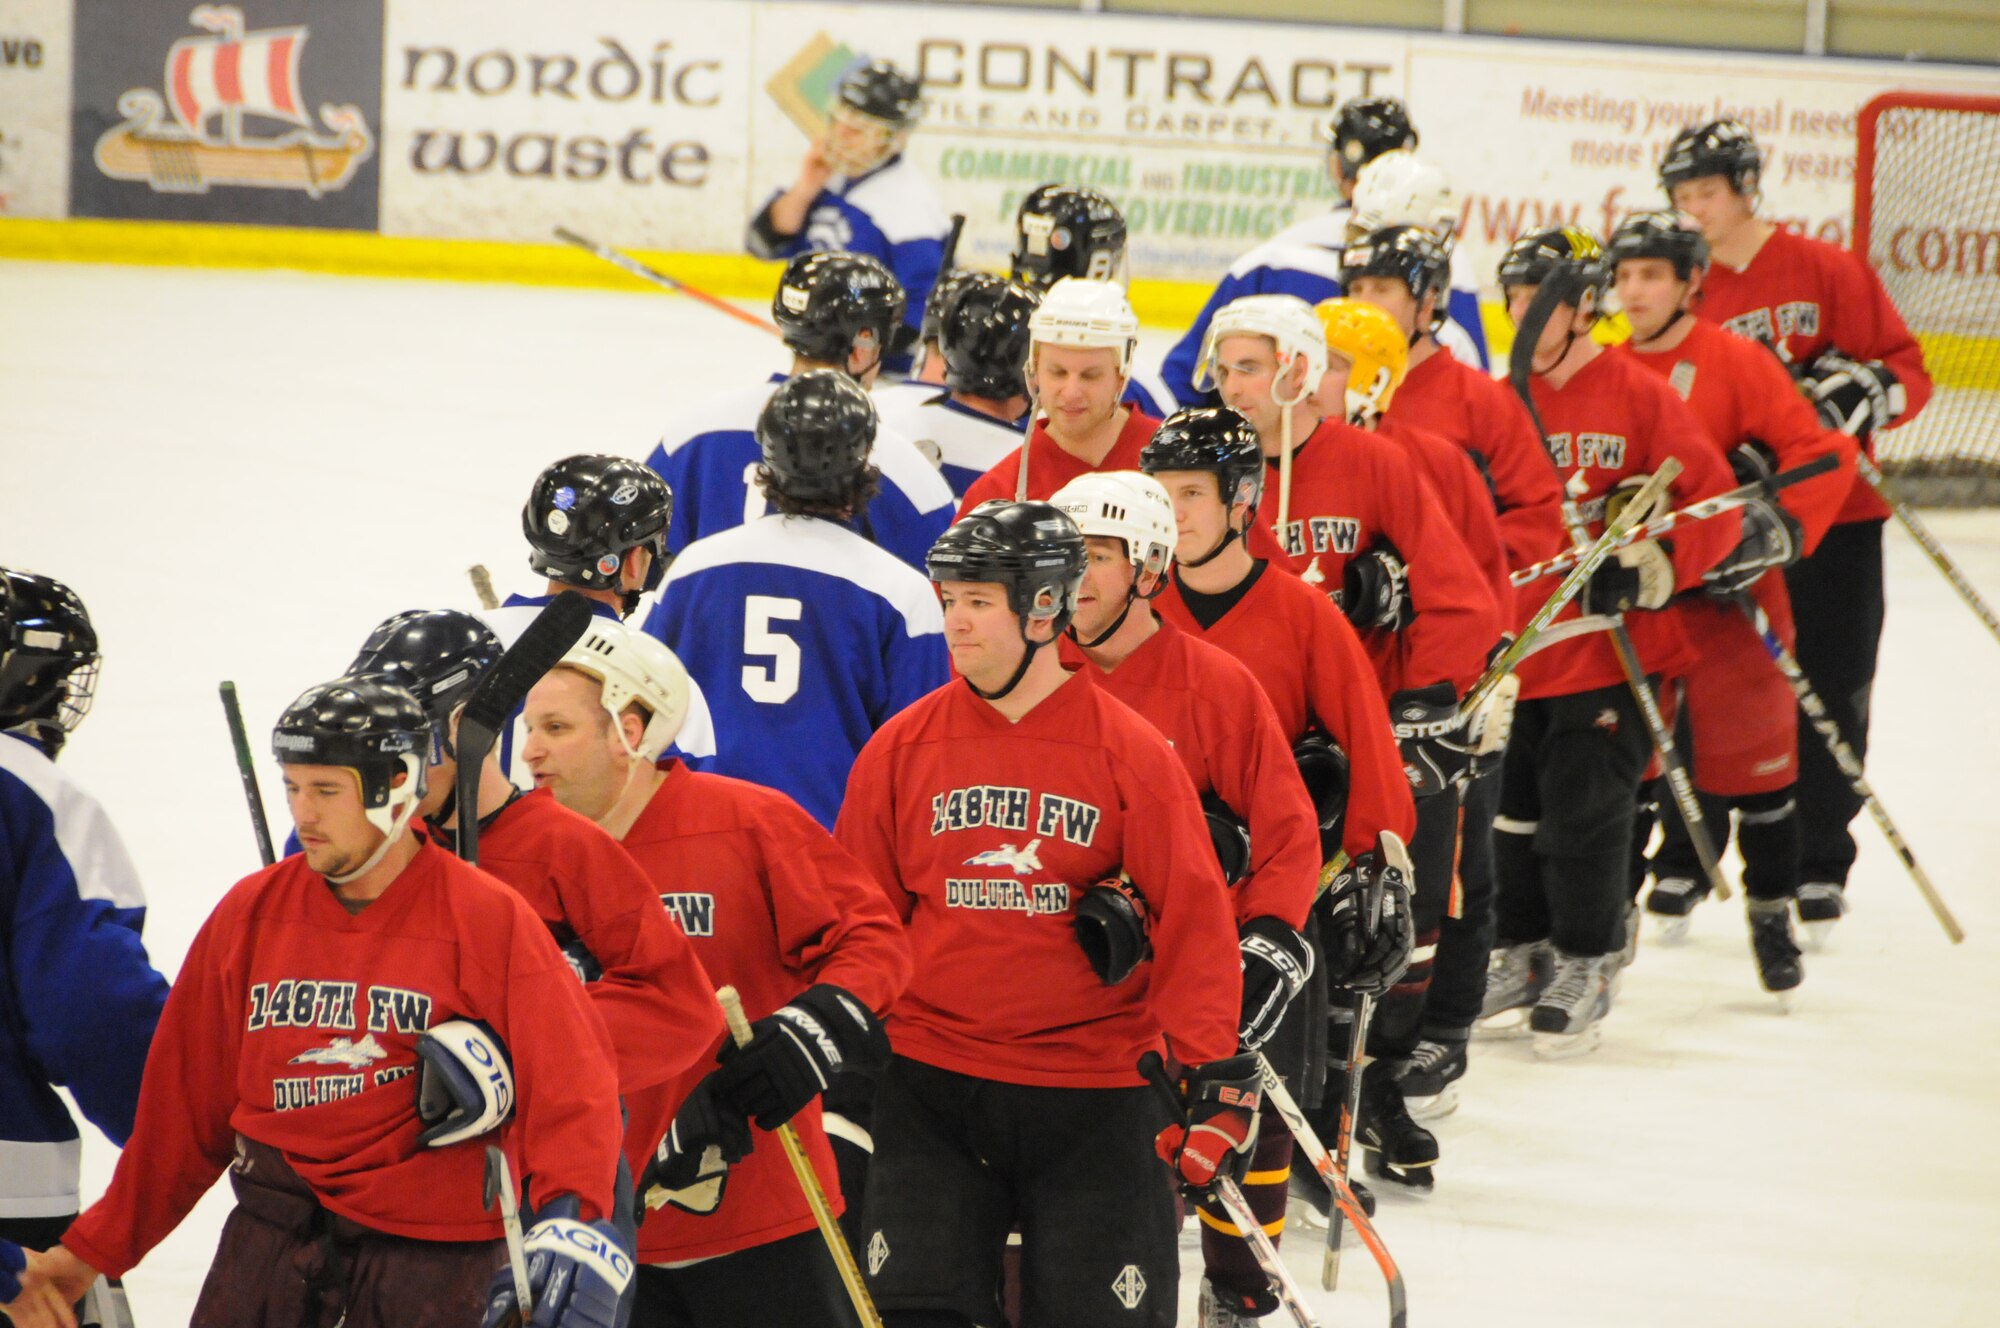 Players from the 148th Fighter Wing, Duluth, Minn. (red uniforms) and 133rd Airlift Wing, St. Paul, Minn. (blue uniforms) shake hands at the conclusion of their hockey game.  The two teams were participating in the 2011 Minnesota National Guard hockey tournament held at the Duluth Heritage Sports Center in Duluth, Minn.  (U.S. Air Force photo by Master Sgt. Ralph J. Kapustka)